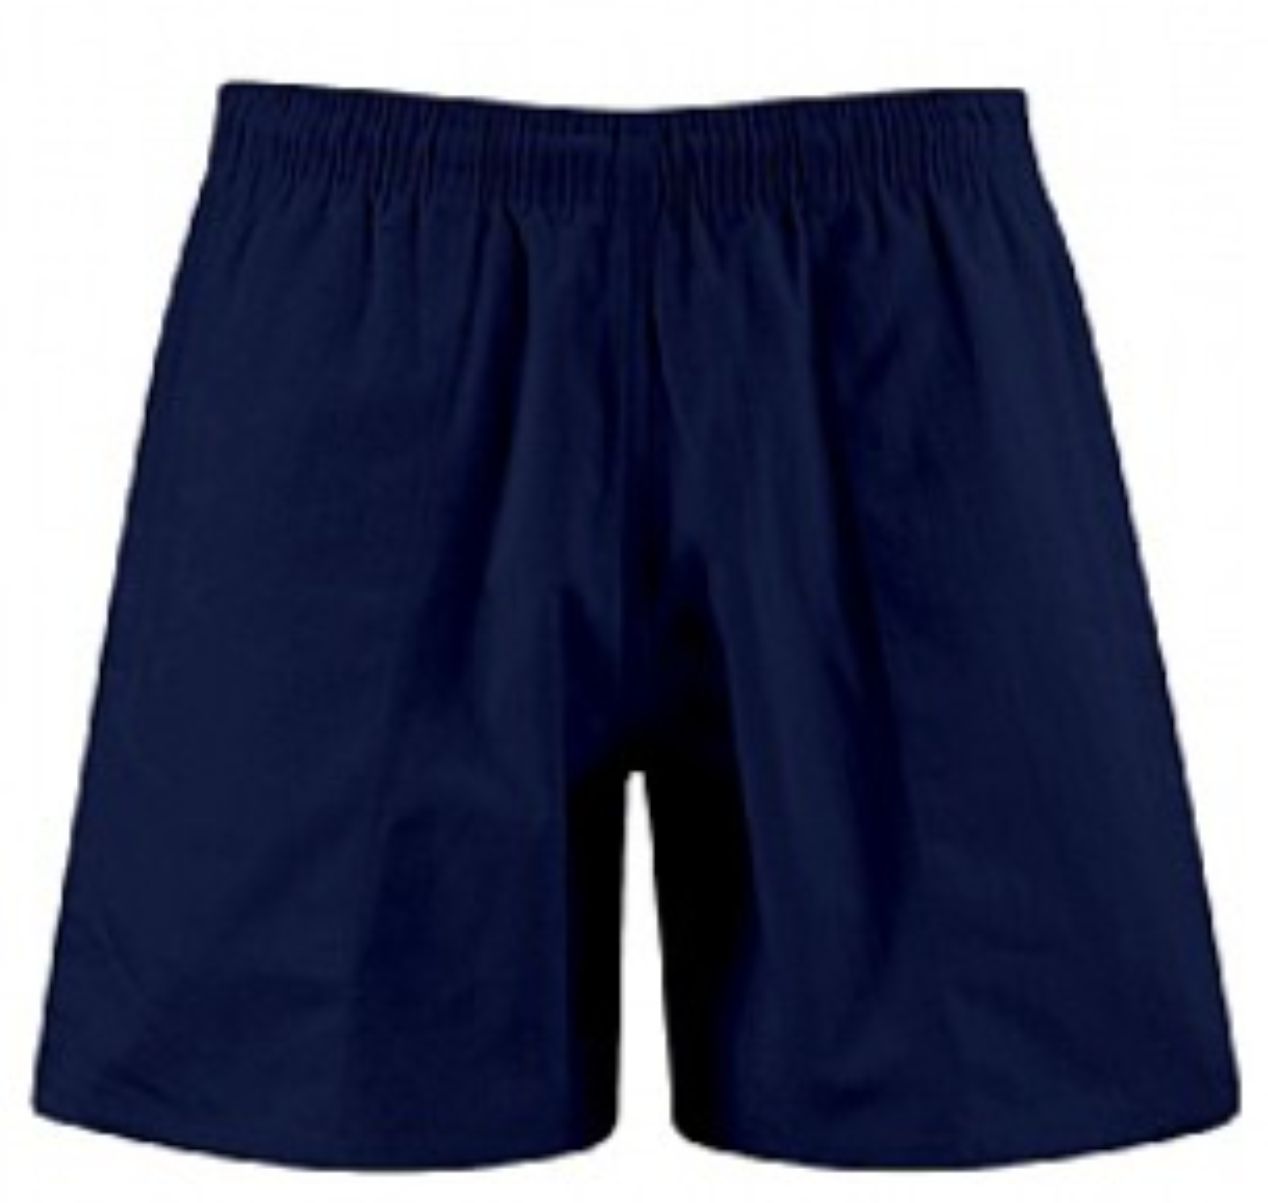 Youth Rugby Shorts